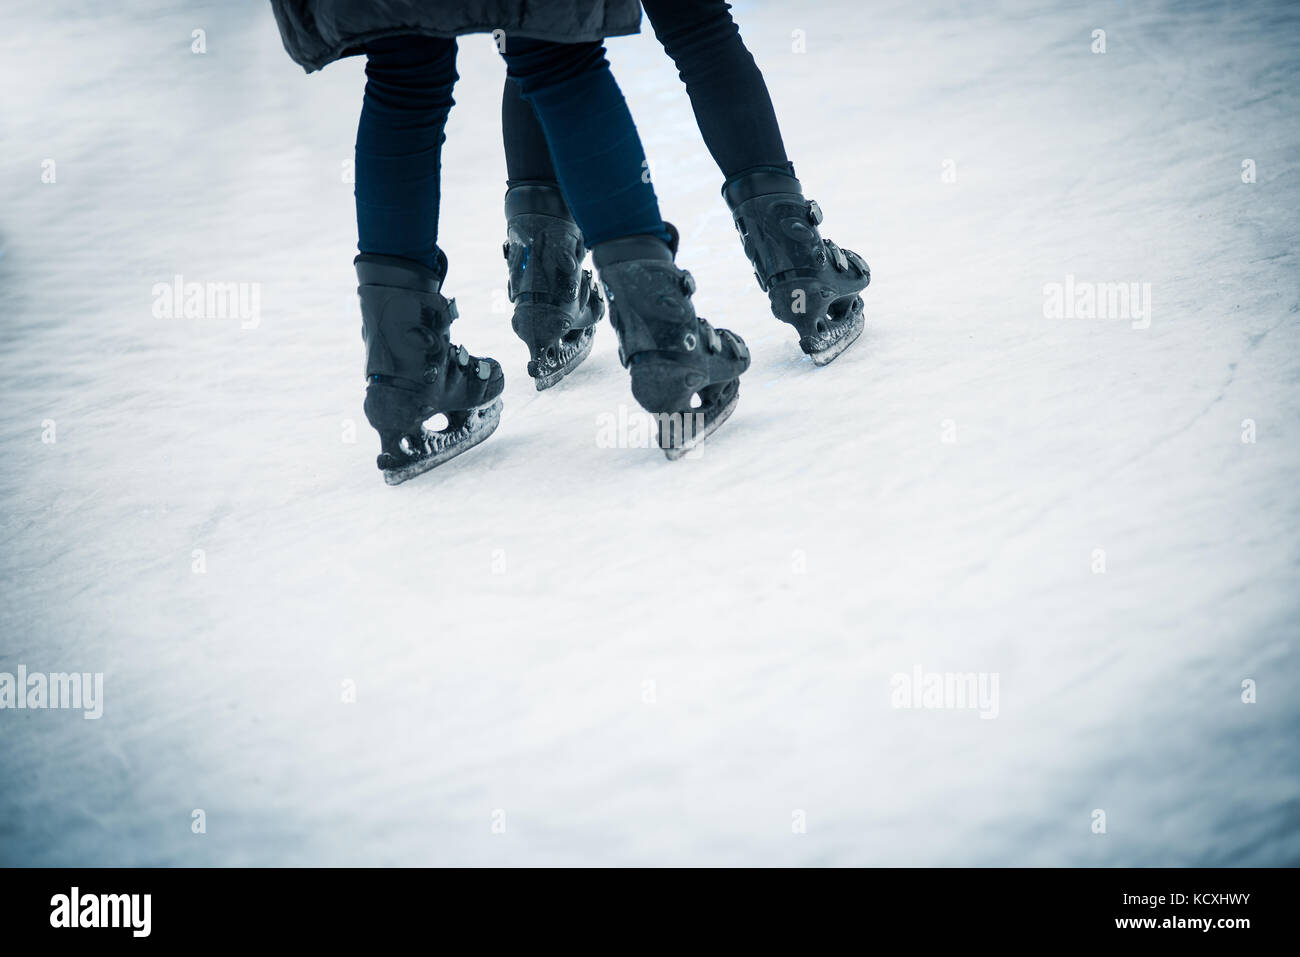 Two young people skating on ice Stock Photo